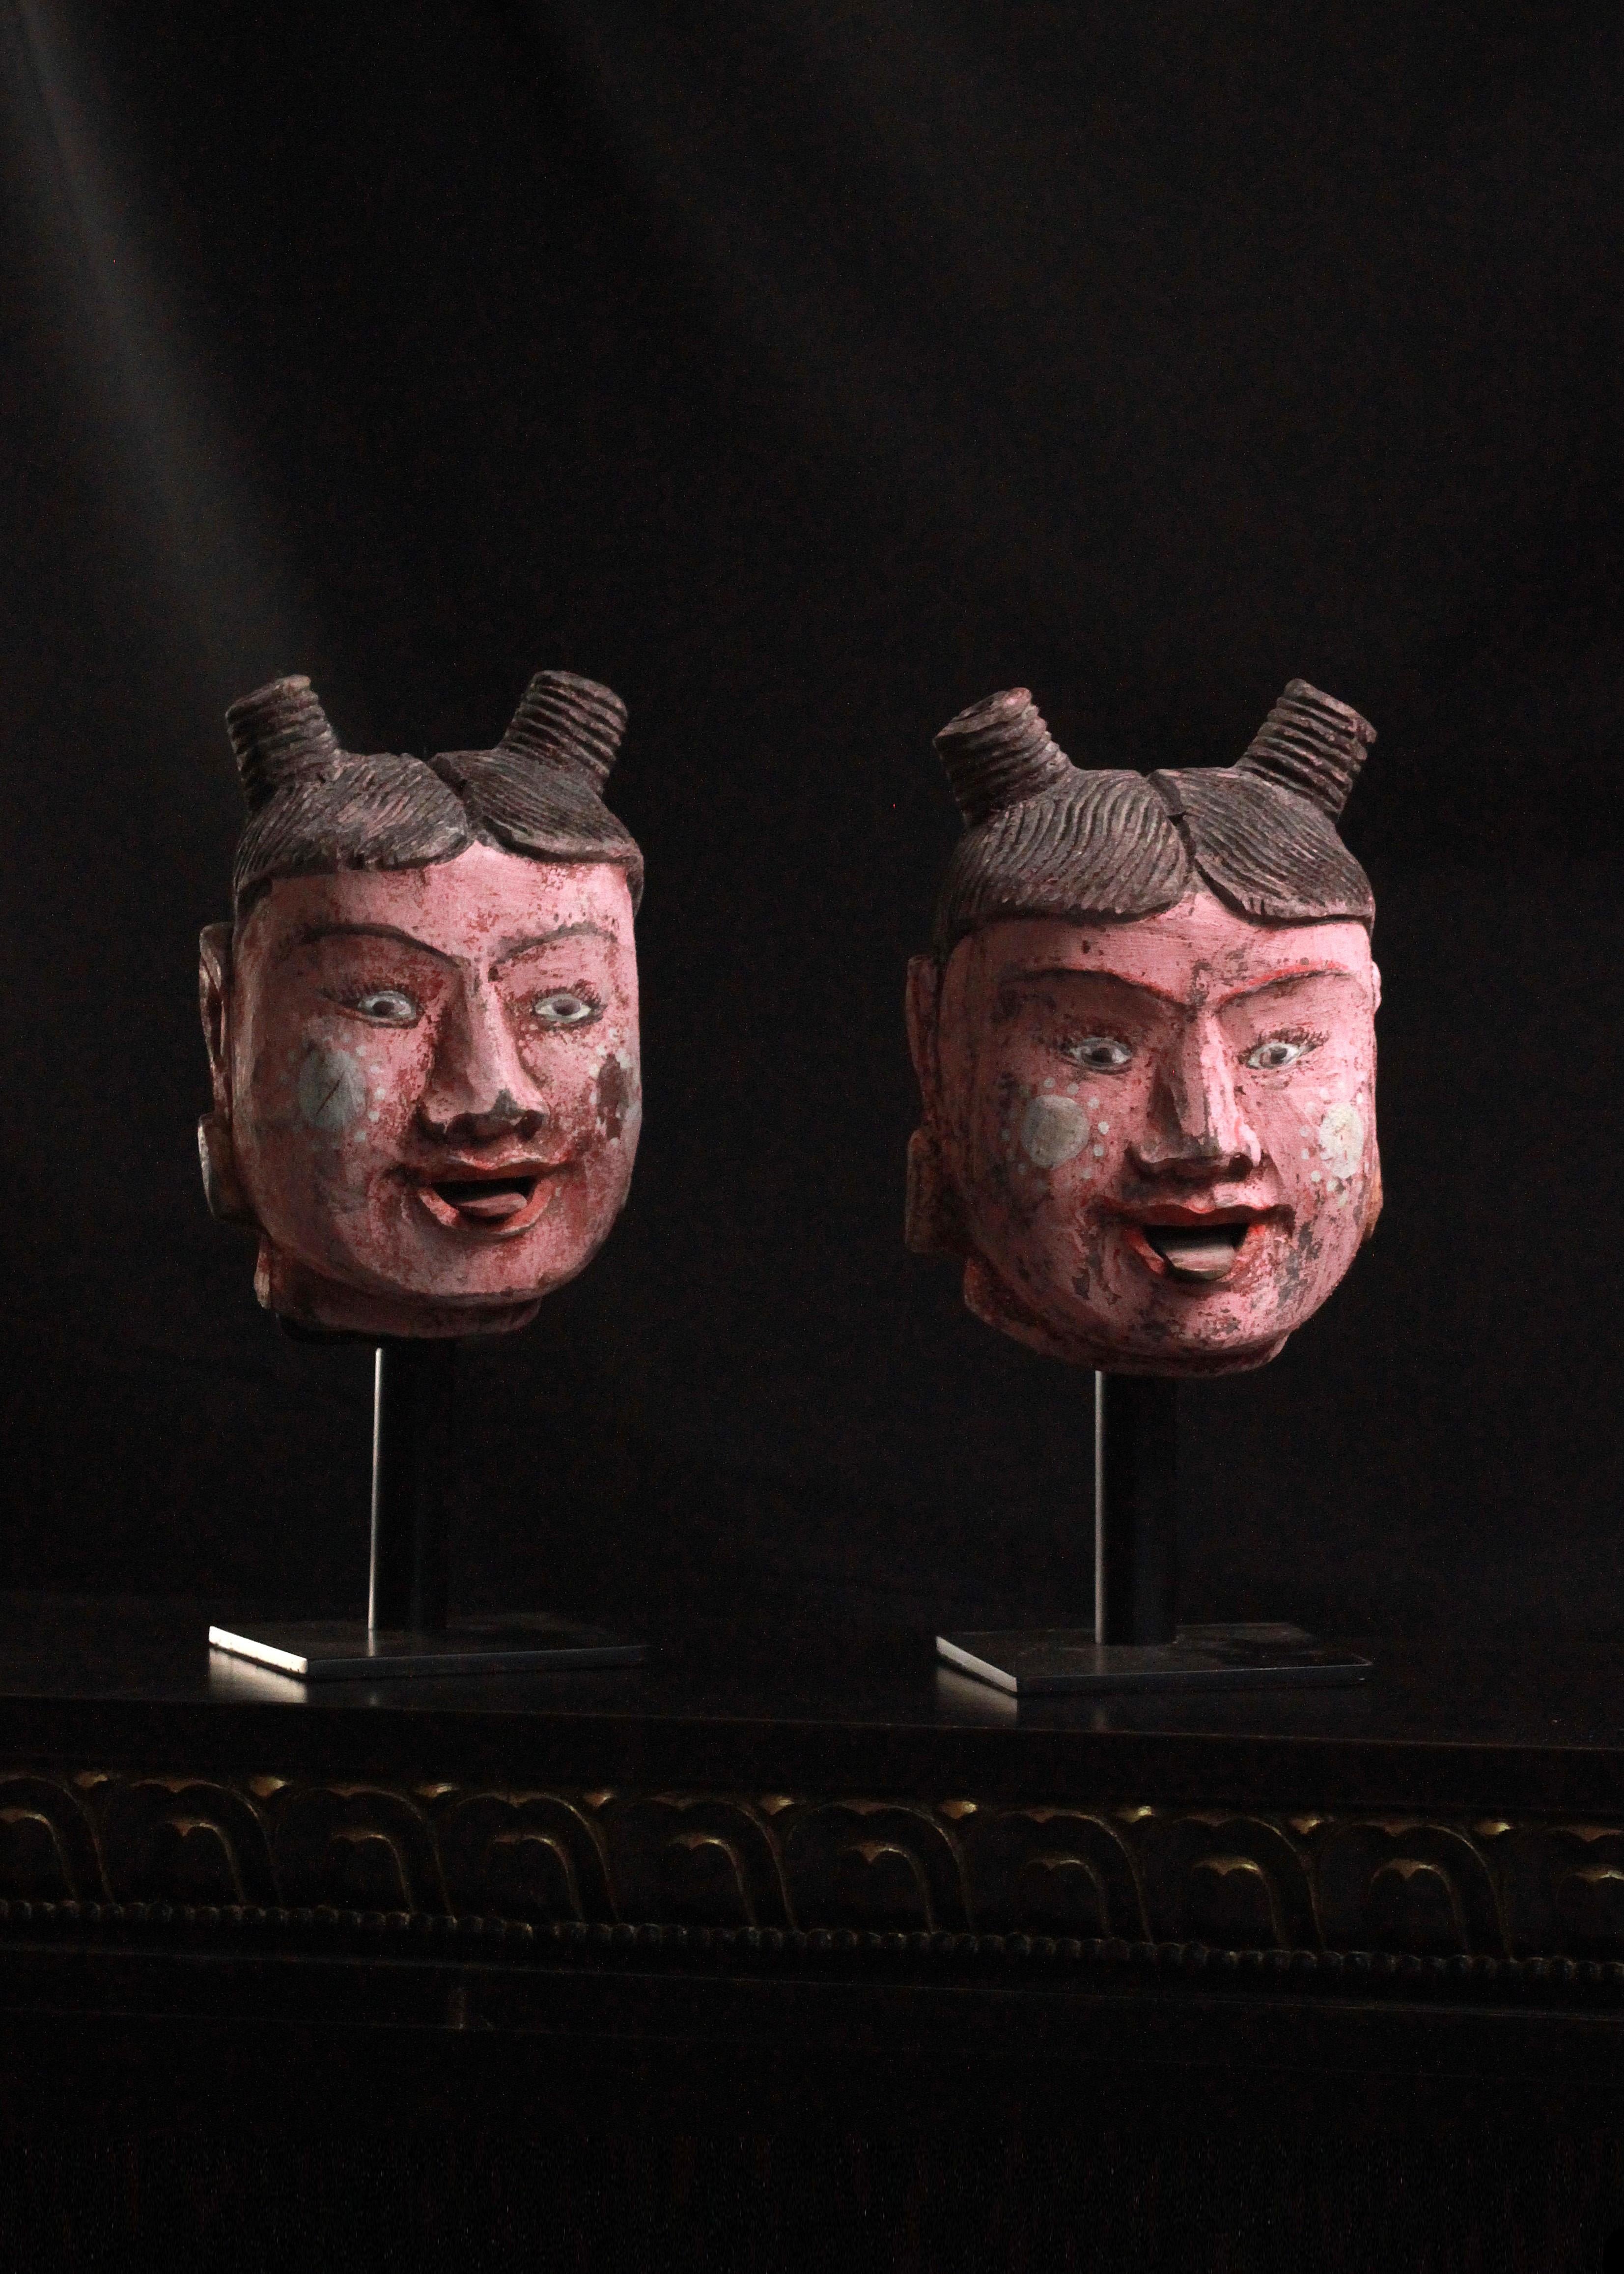 This captivating set of two polychrome puppet heads, meticulously mounted, transports viewers to the vibrant world of Burmese artistry. Handcrafted, these expressive puppet heads come alive with character. Their features, painted in vivid hues,